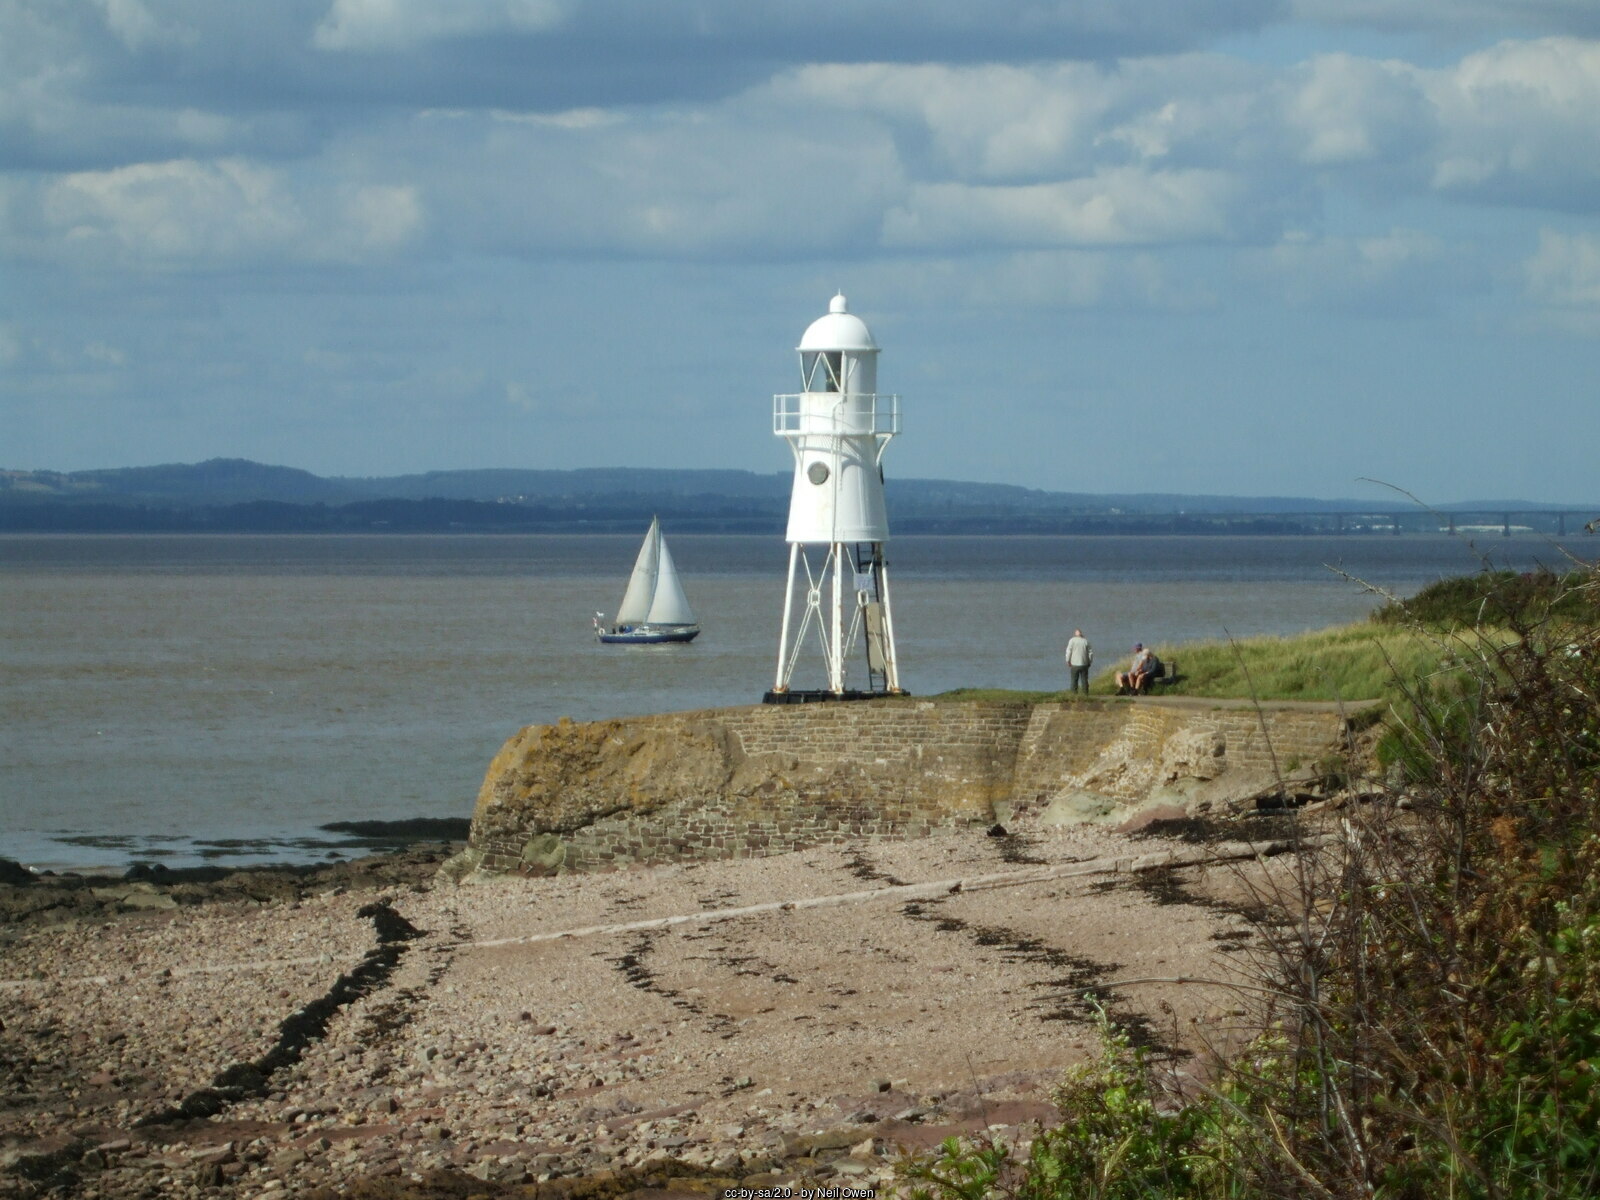 Visit the Black Nore lighthouse in Portishead